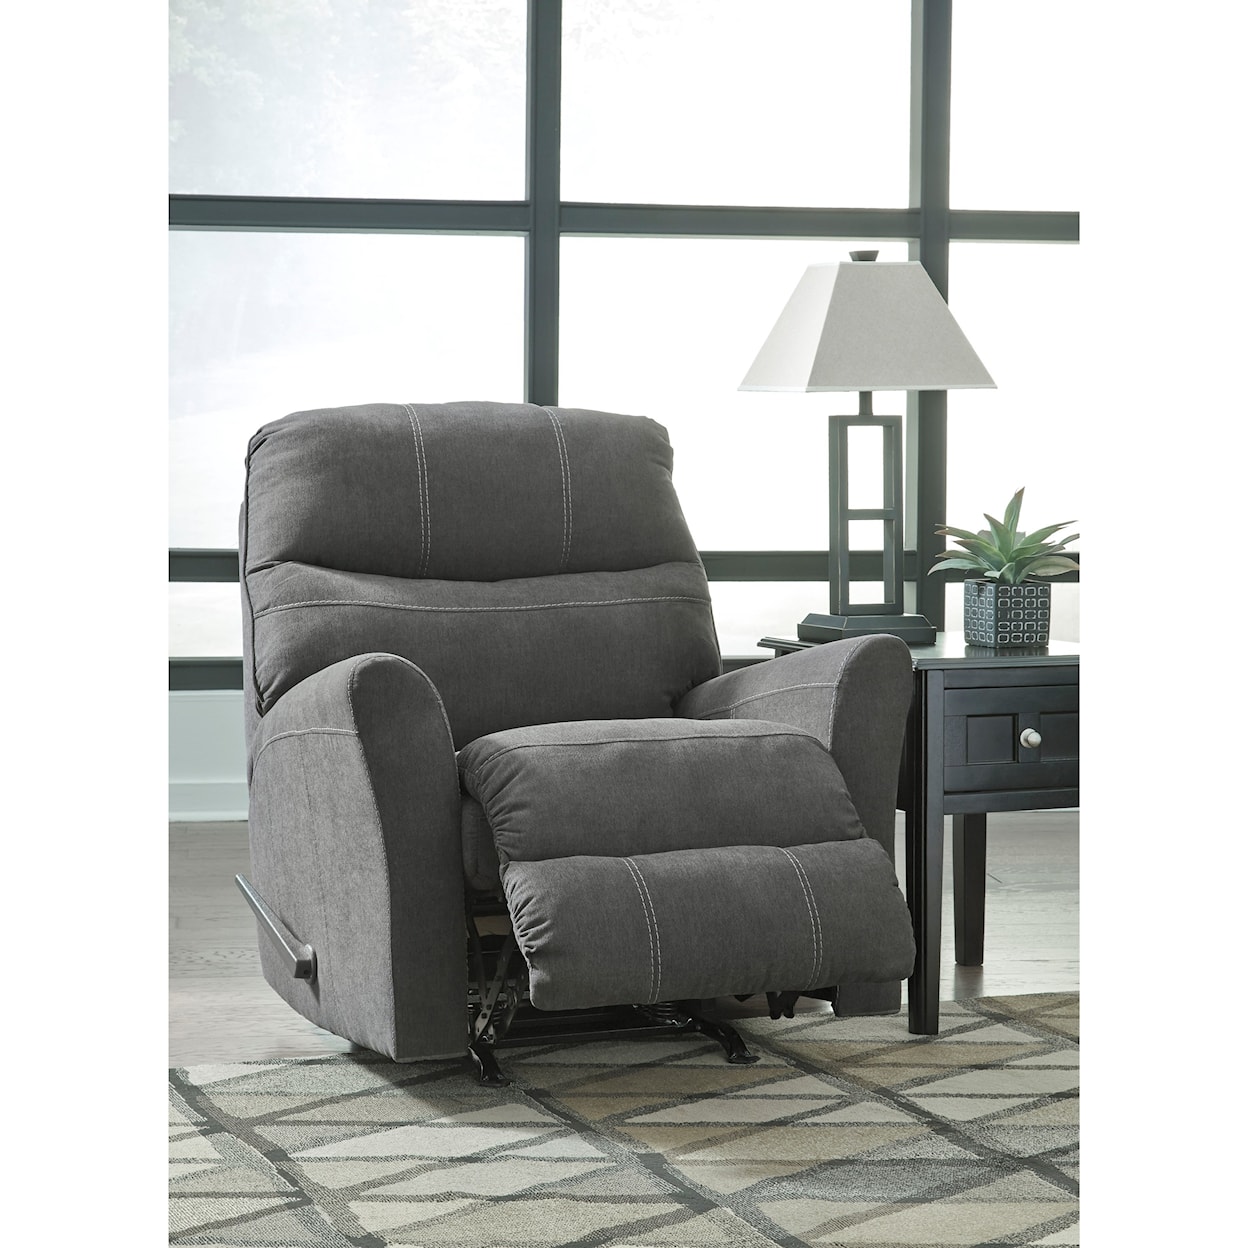 Benchcraft Mayberry Recliner